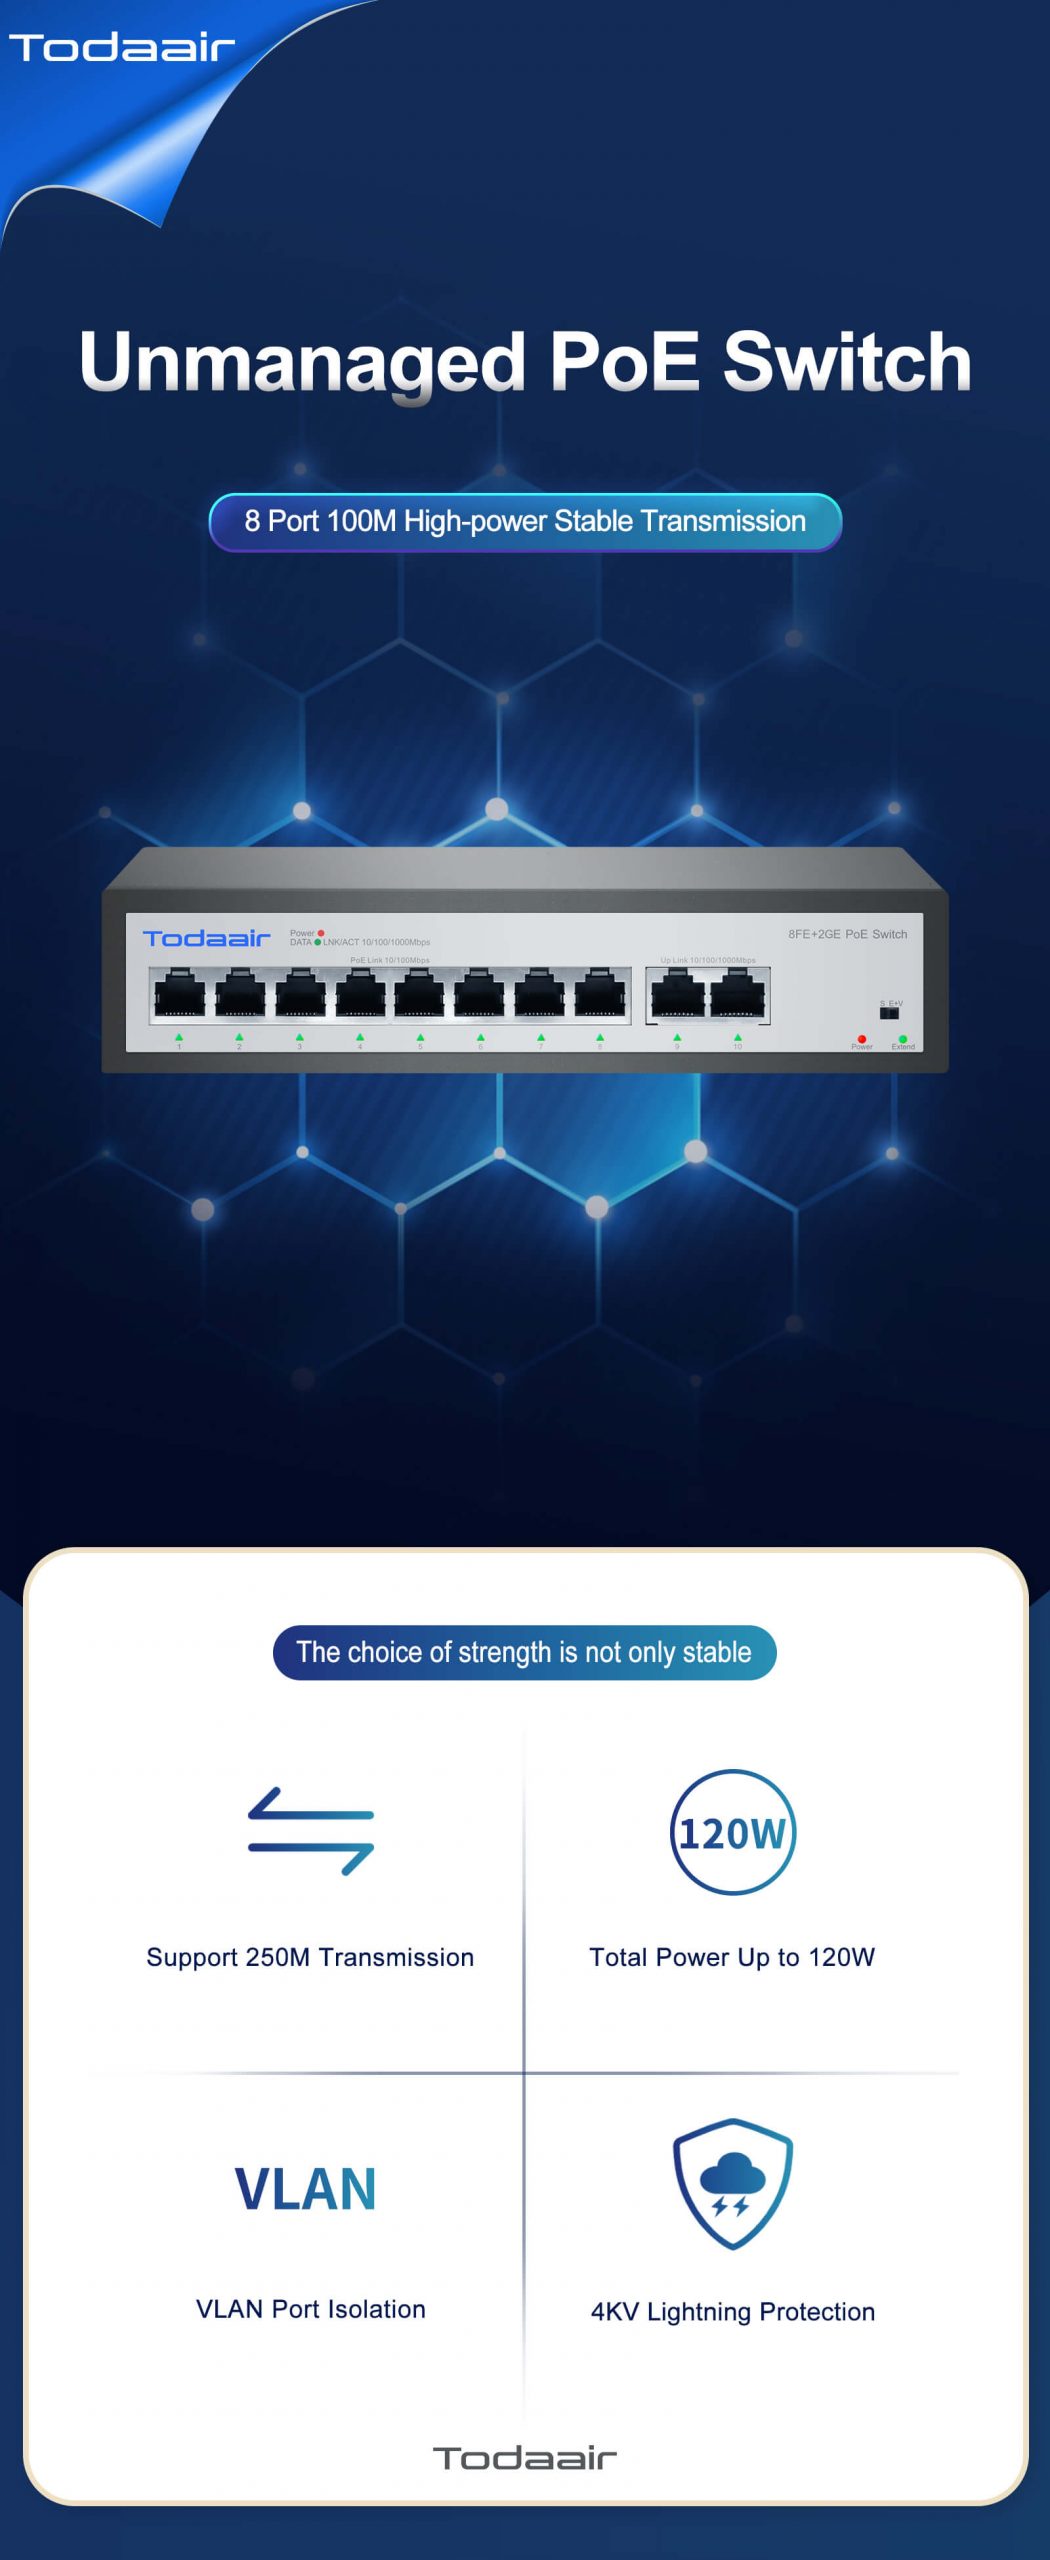 Todaair 8 port unmanaged POE switch